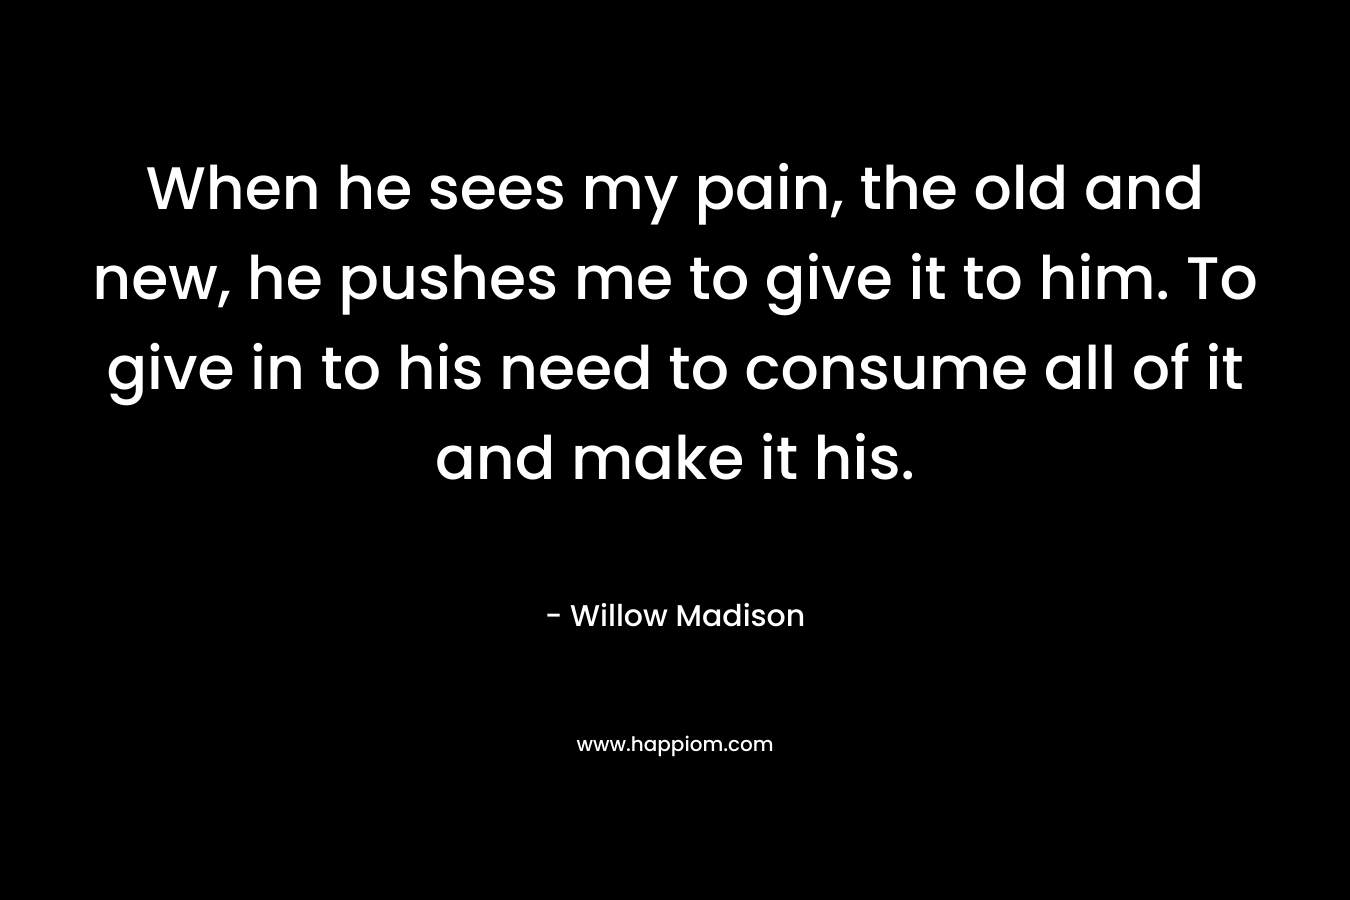 When he sees my pain, the old and new, he pushes me to give it to him. To give in to his need to consume all of it and make it his. – Willow Madison